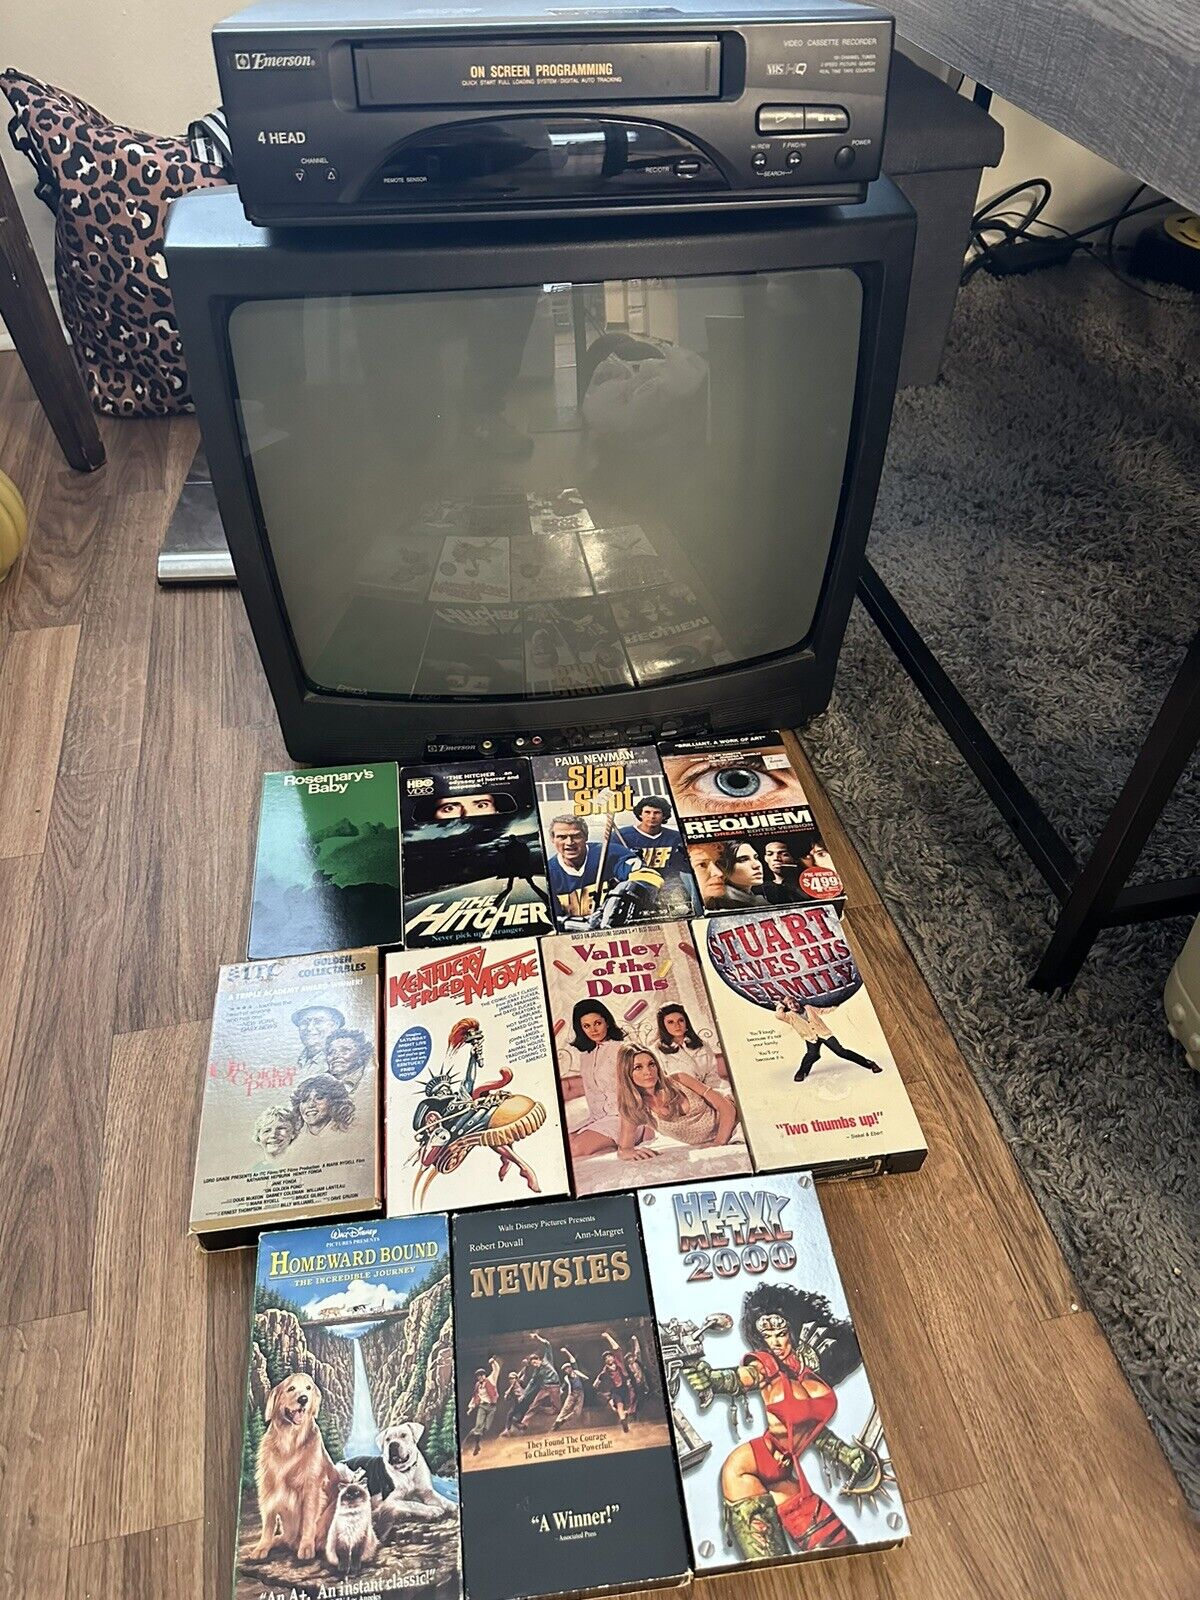 VINTAGE Gaming 19” Emerson CRT TV EWT19S2 -With EMERSON VCR and Tape Lot )